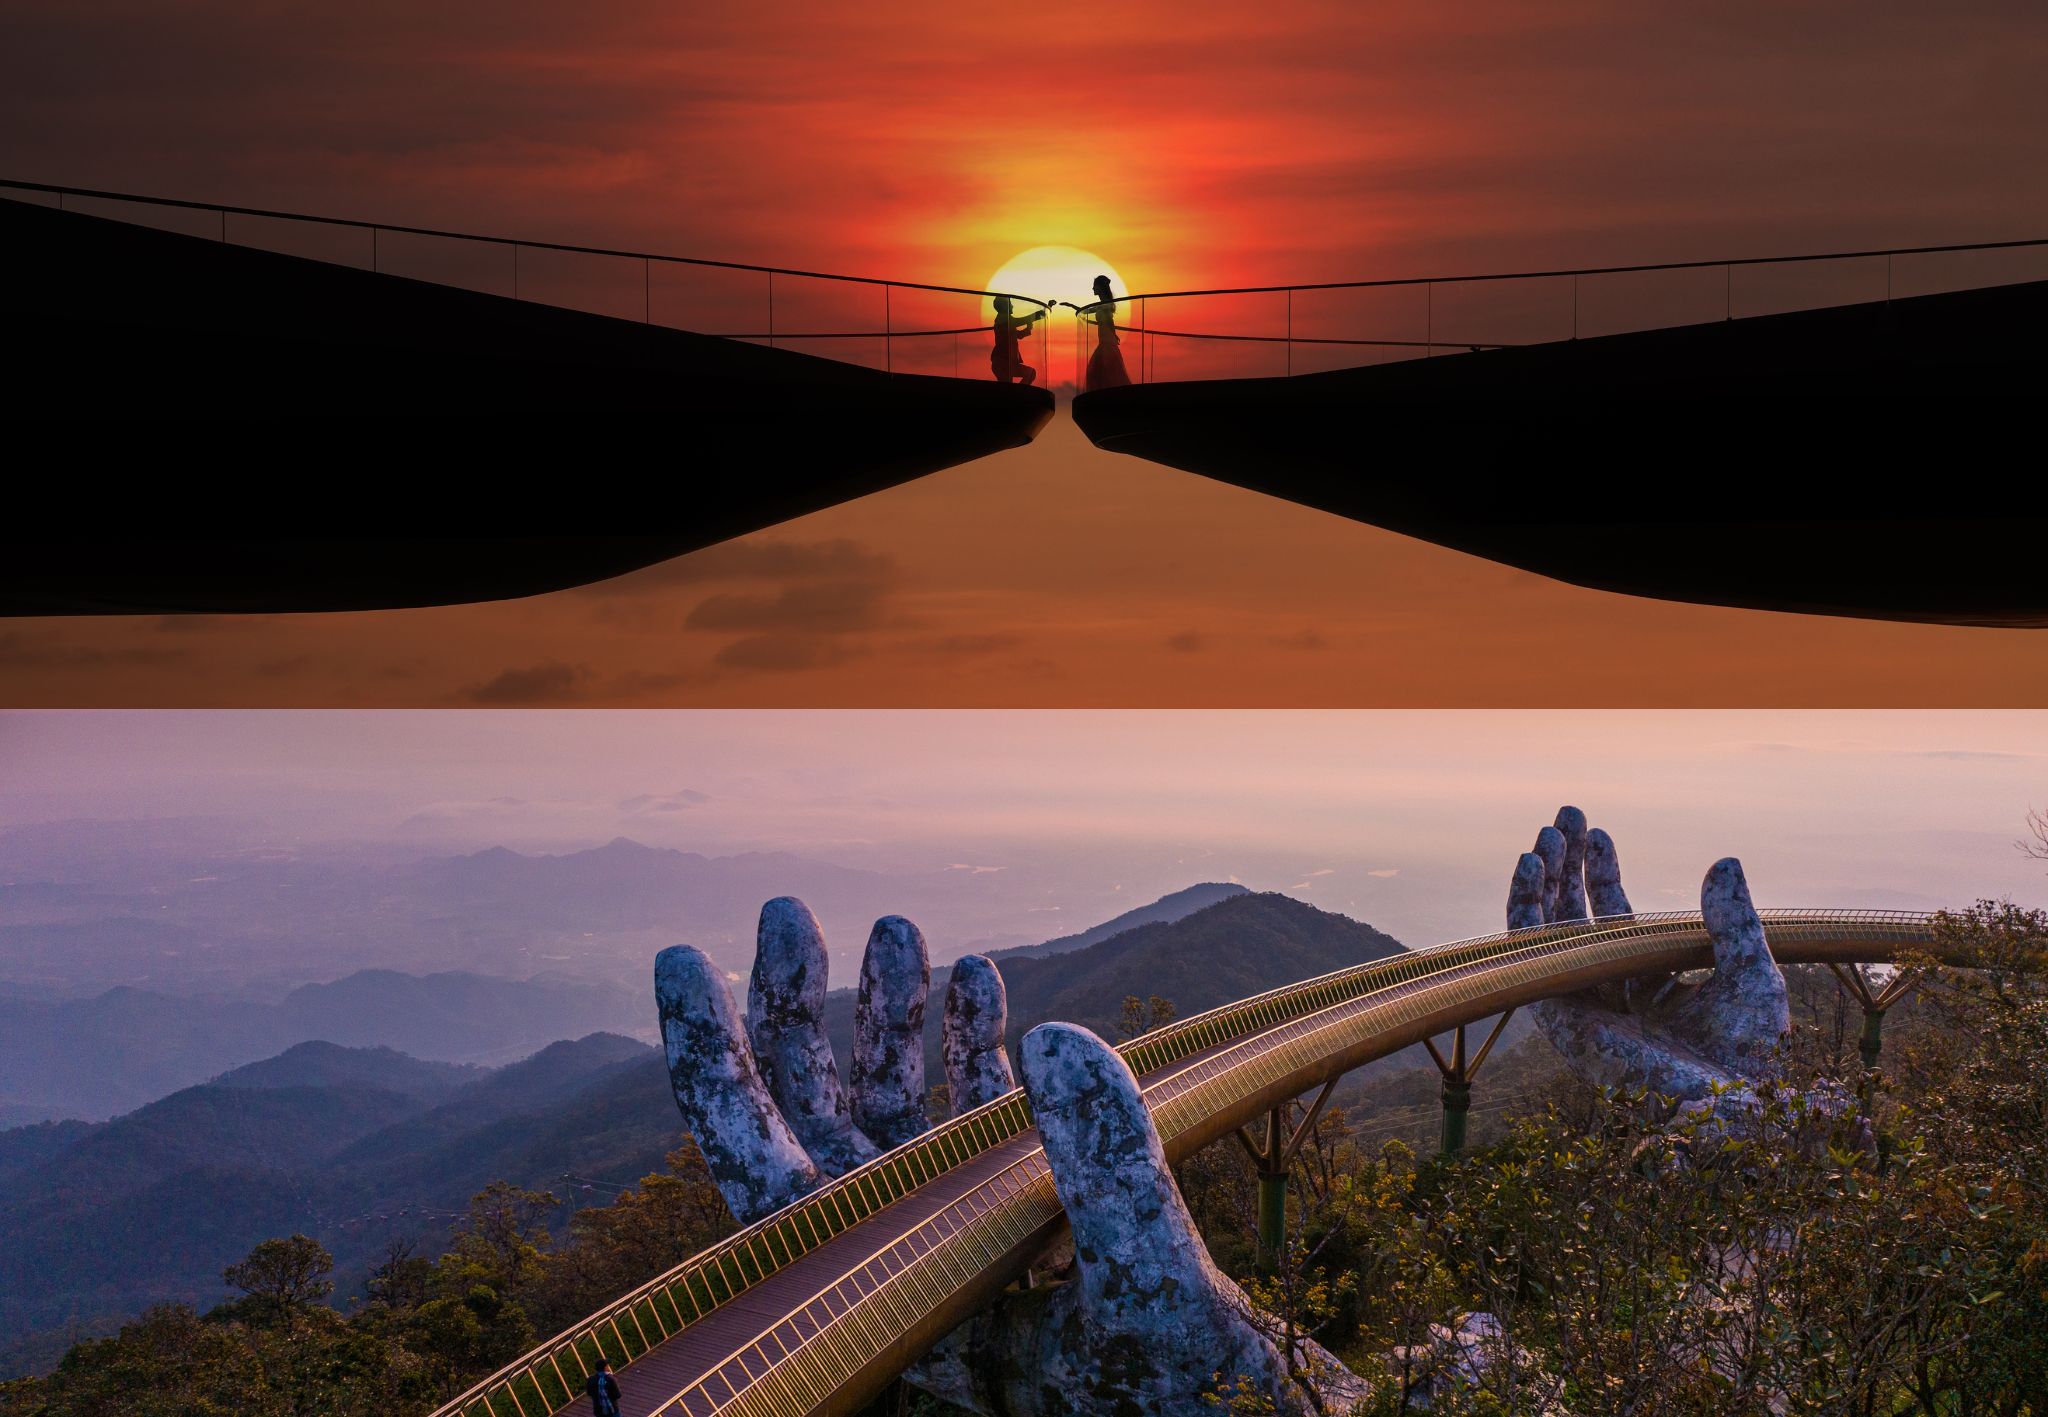 Following the success of the Golden Bridge in Sun World Ba Na Hills, Da Nang, Phu Quoc's Kiss Bridge promises to become a new enduring symbol of tourism in Vietnam.